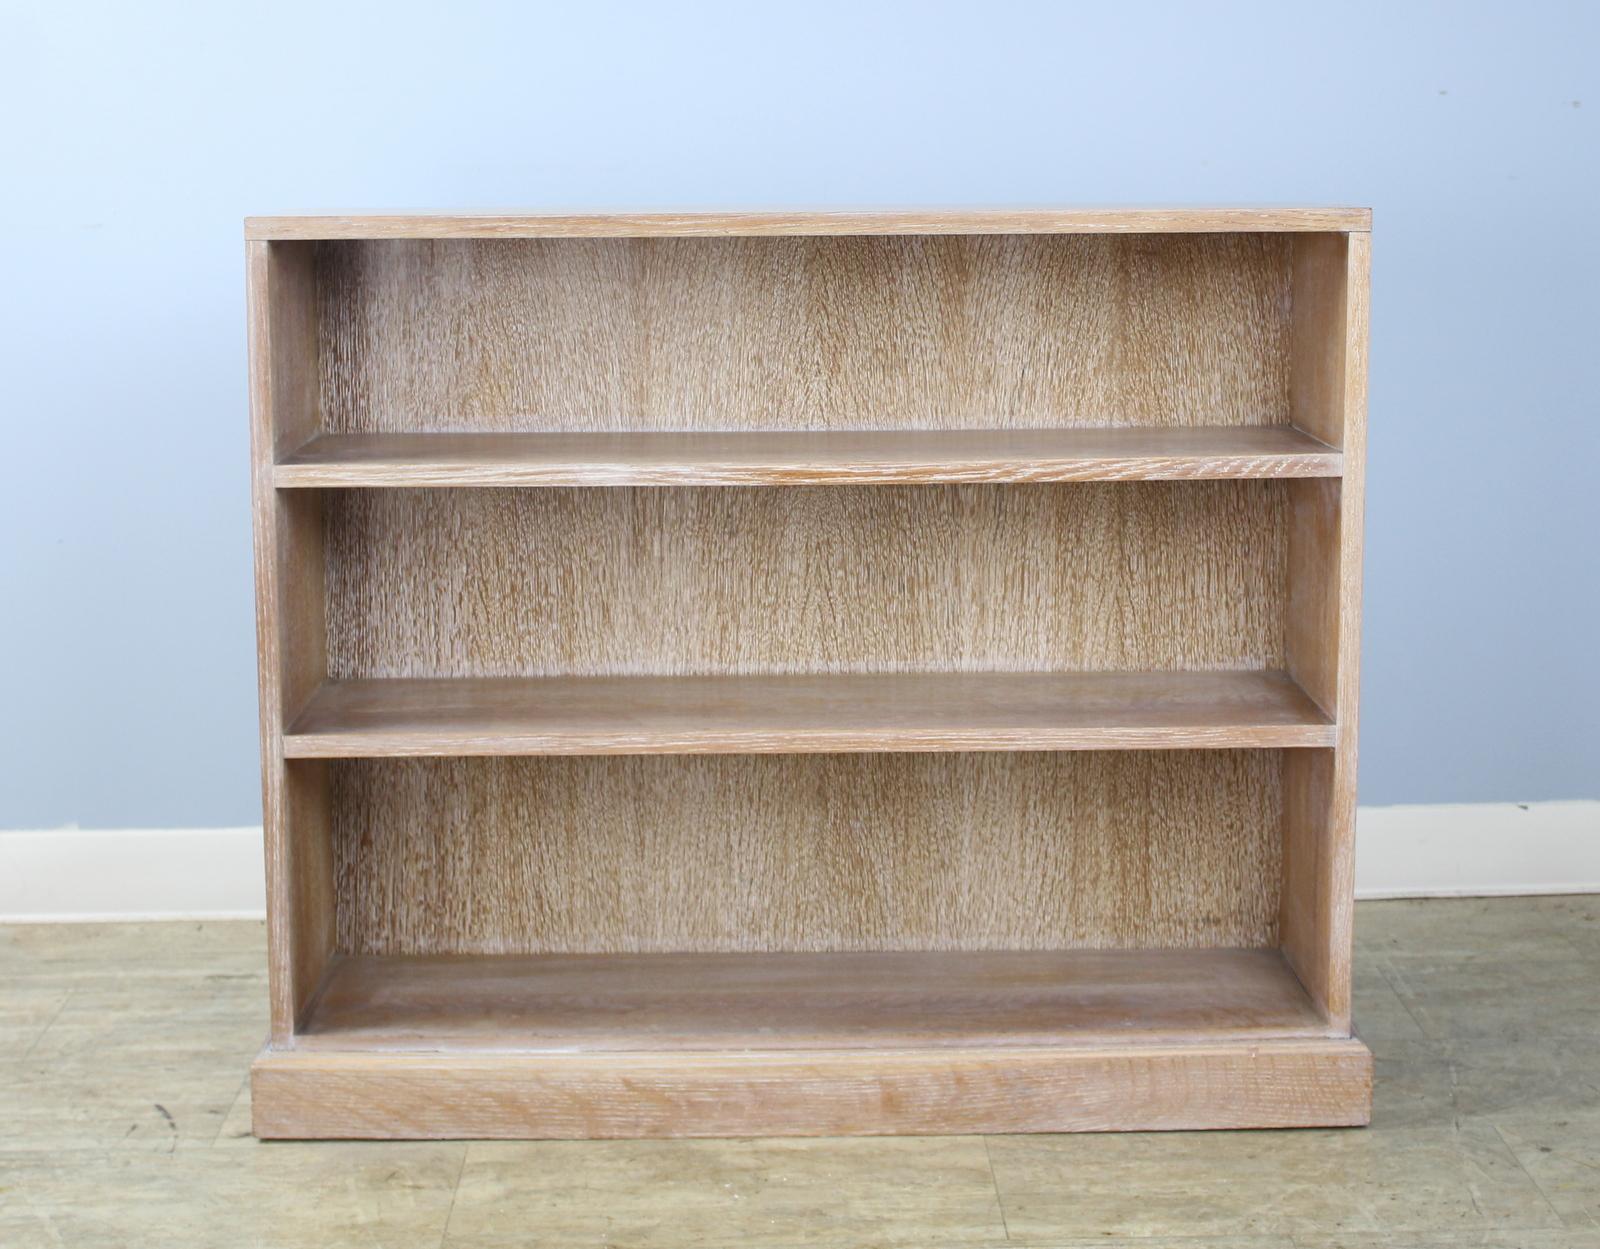 A simple and classic oak bookcase with it's original liming in the style of Heal's, a London maker of limed oak furniture. Handsome silhouette with a generous classic plinth at the base.  